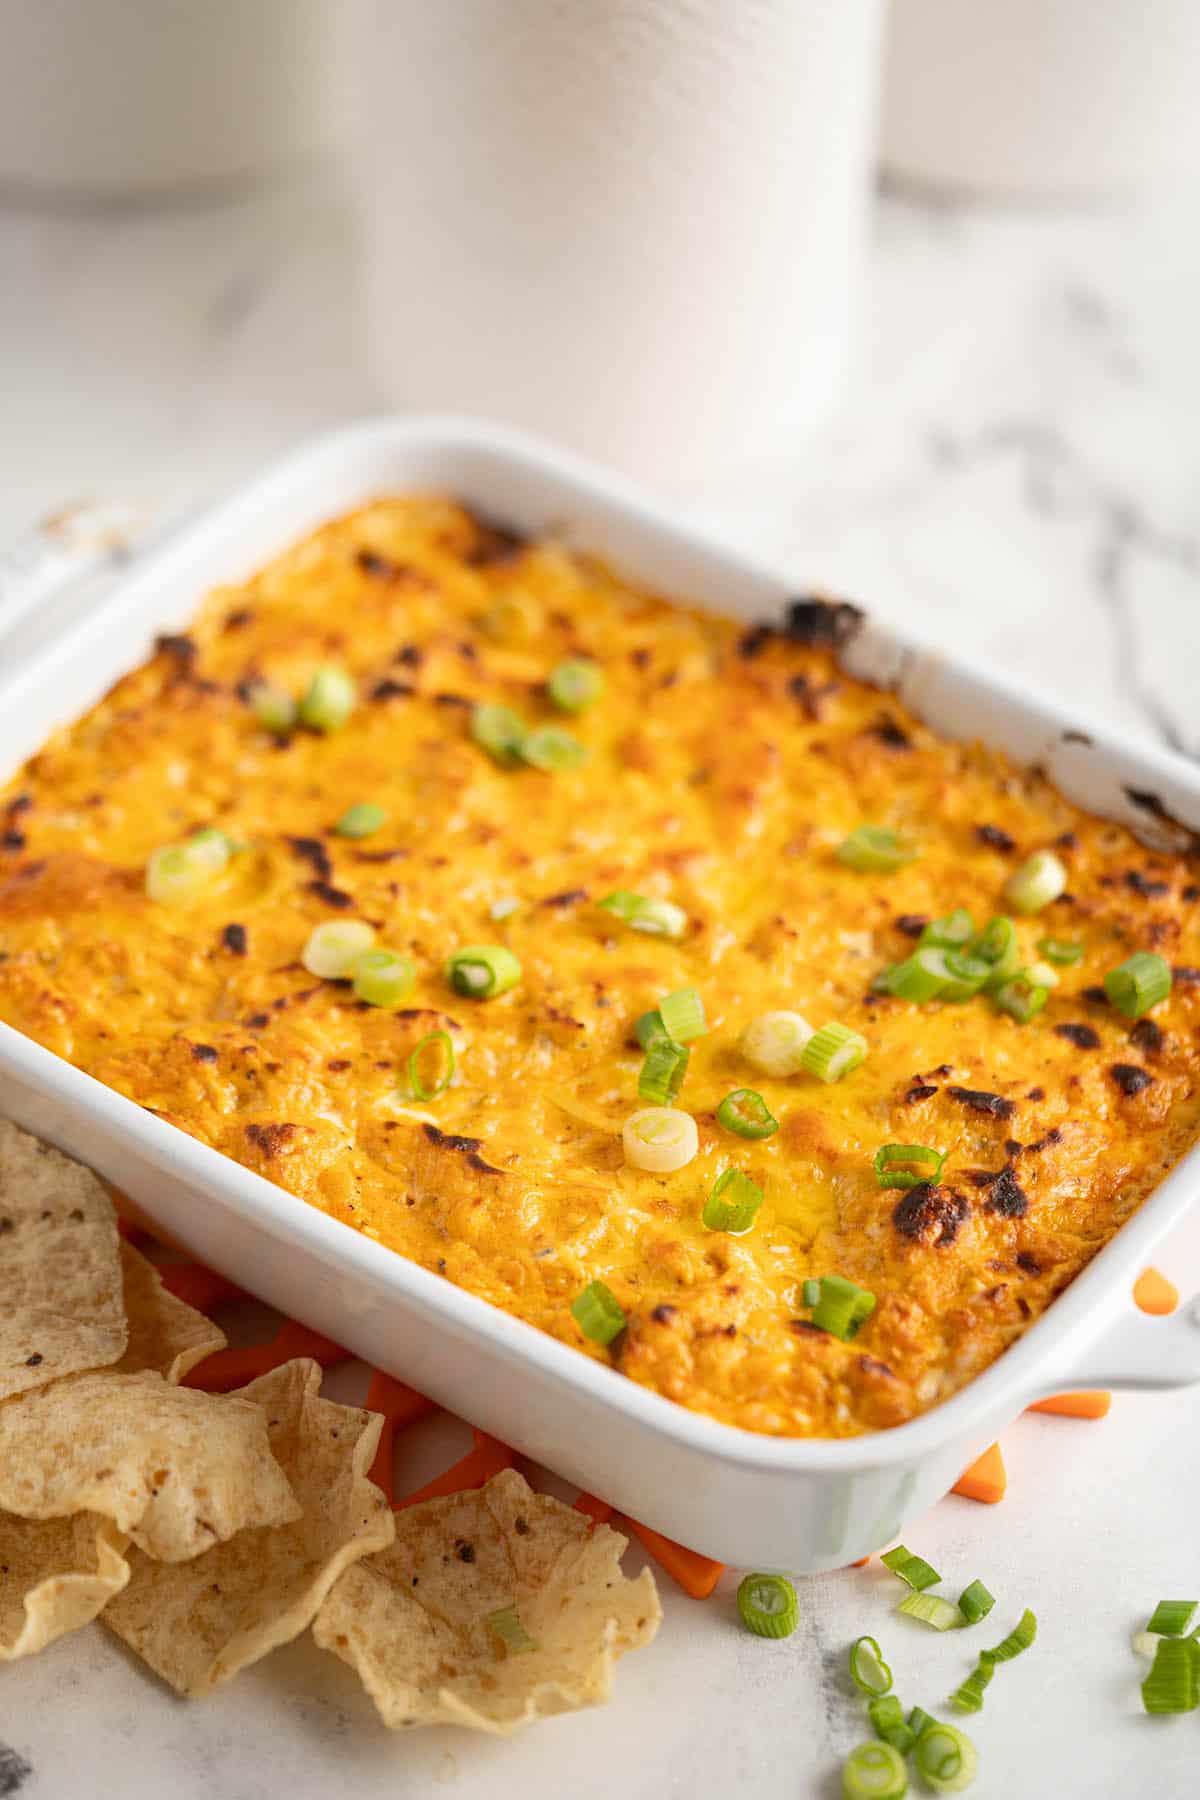 A small casserole dish filled with Hidden Valley Buffalo Chicken Dip. With chips on the side.